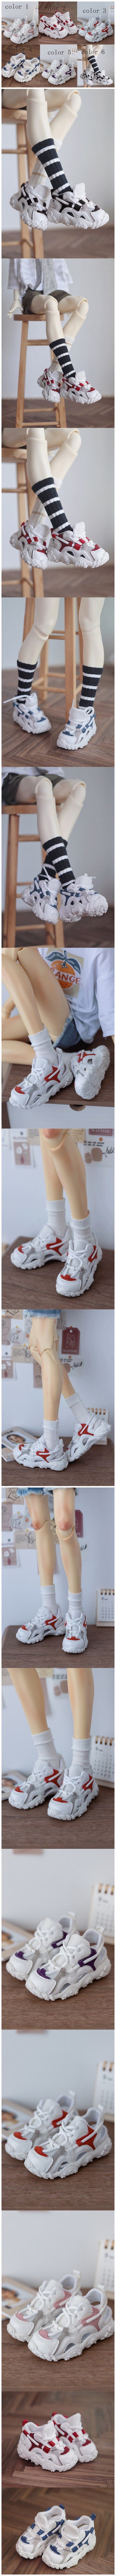 doll sport shoes